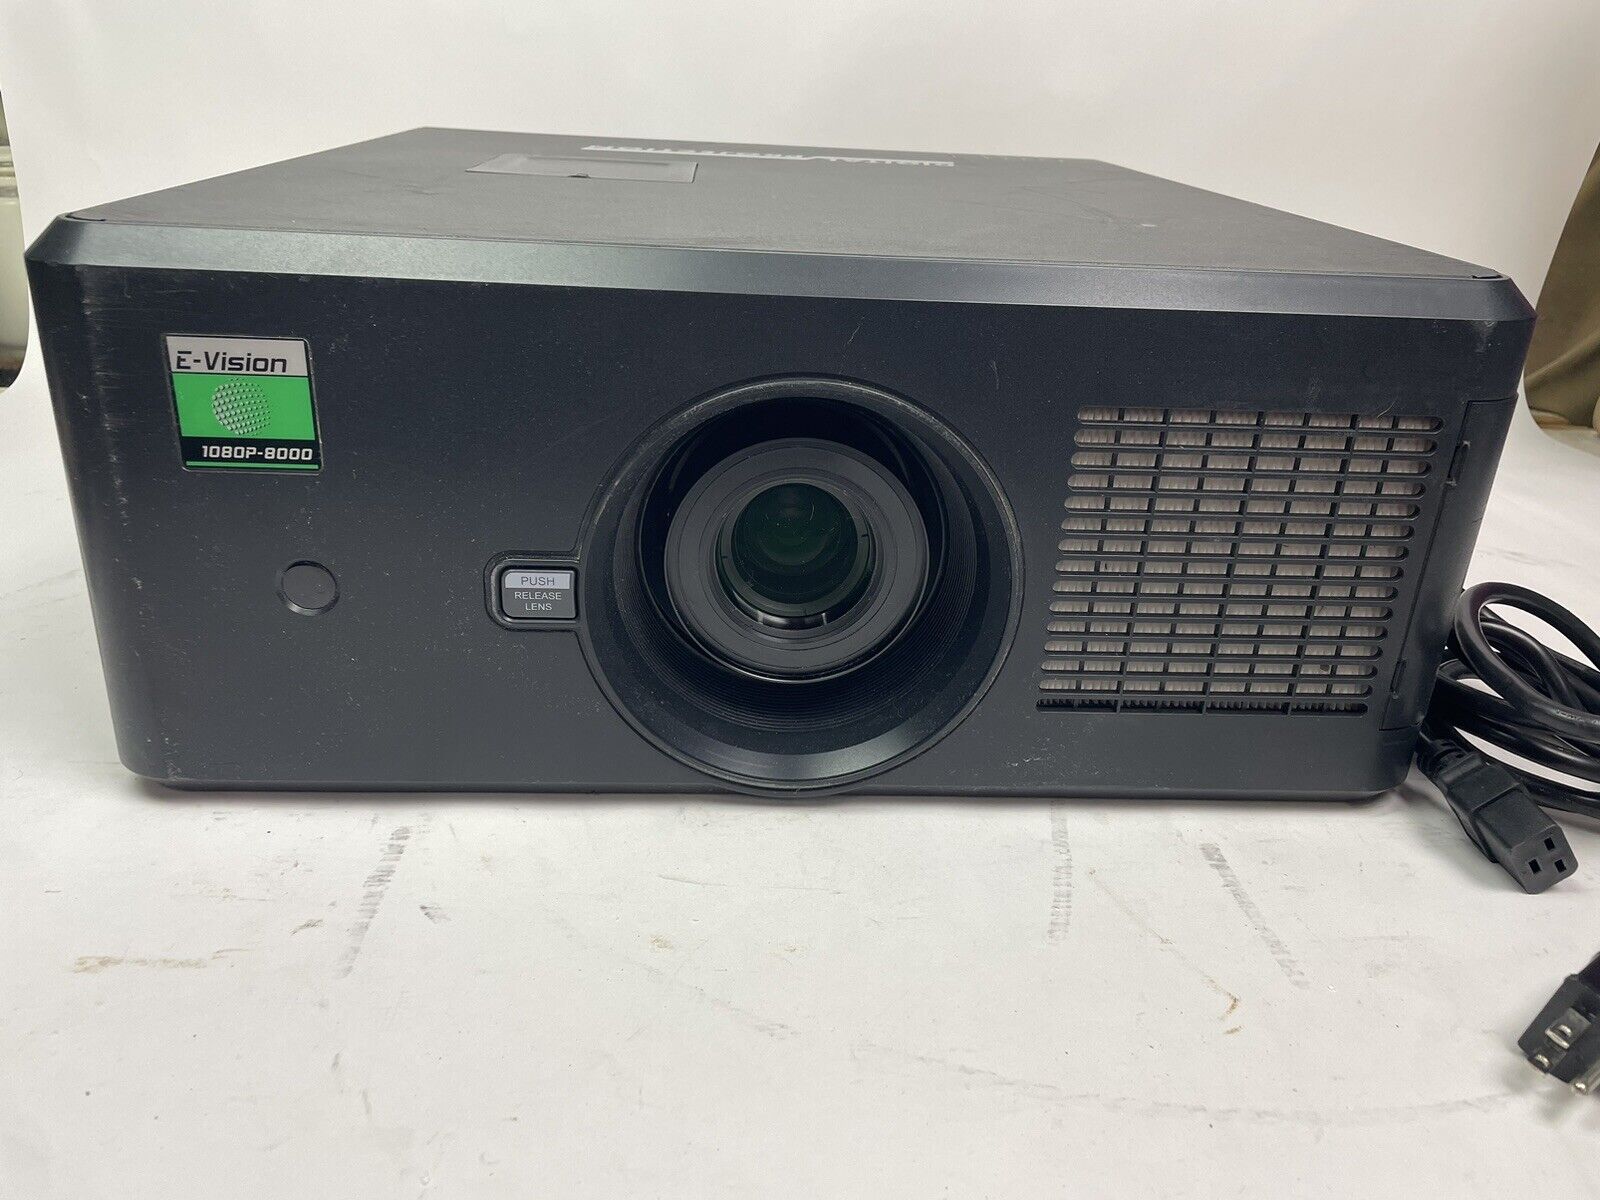 Digital Projection E-Vision+ 1080P-8000 Full HD HDMI DLP Projector *TESTED*